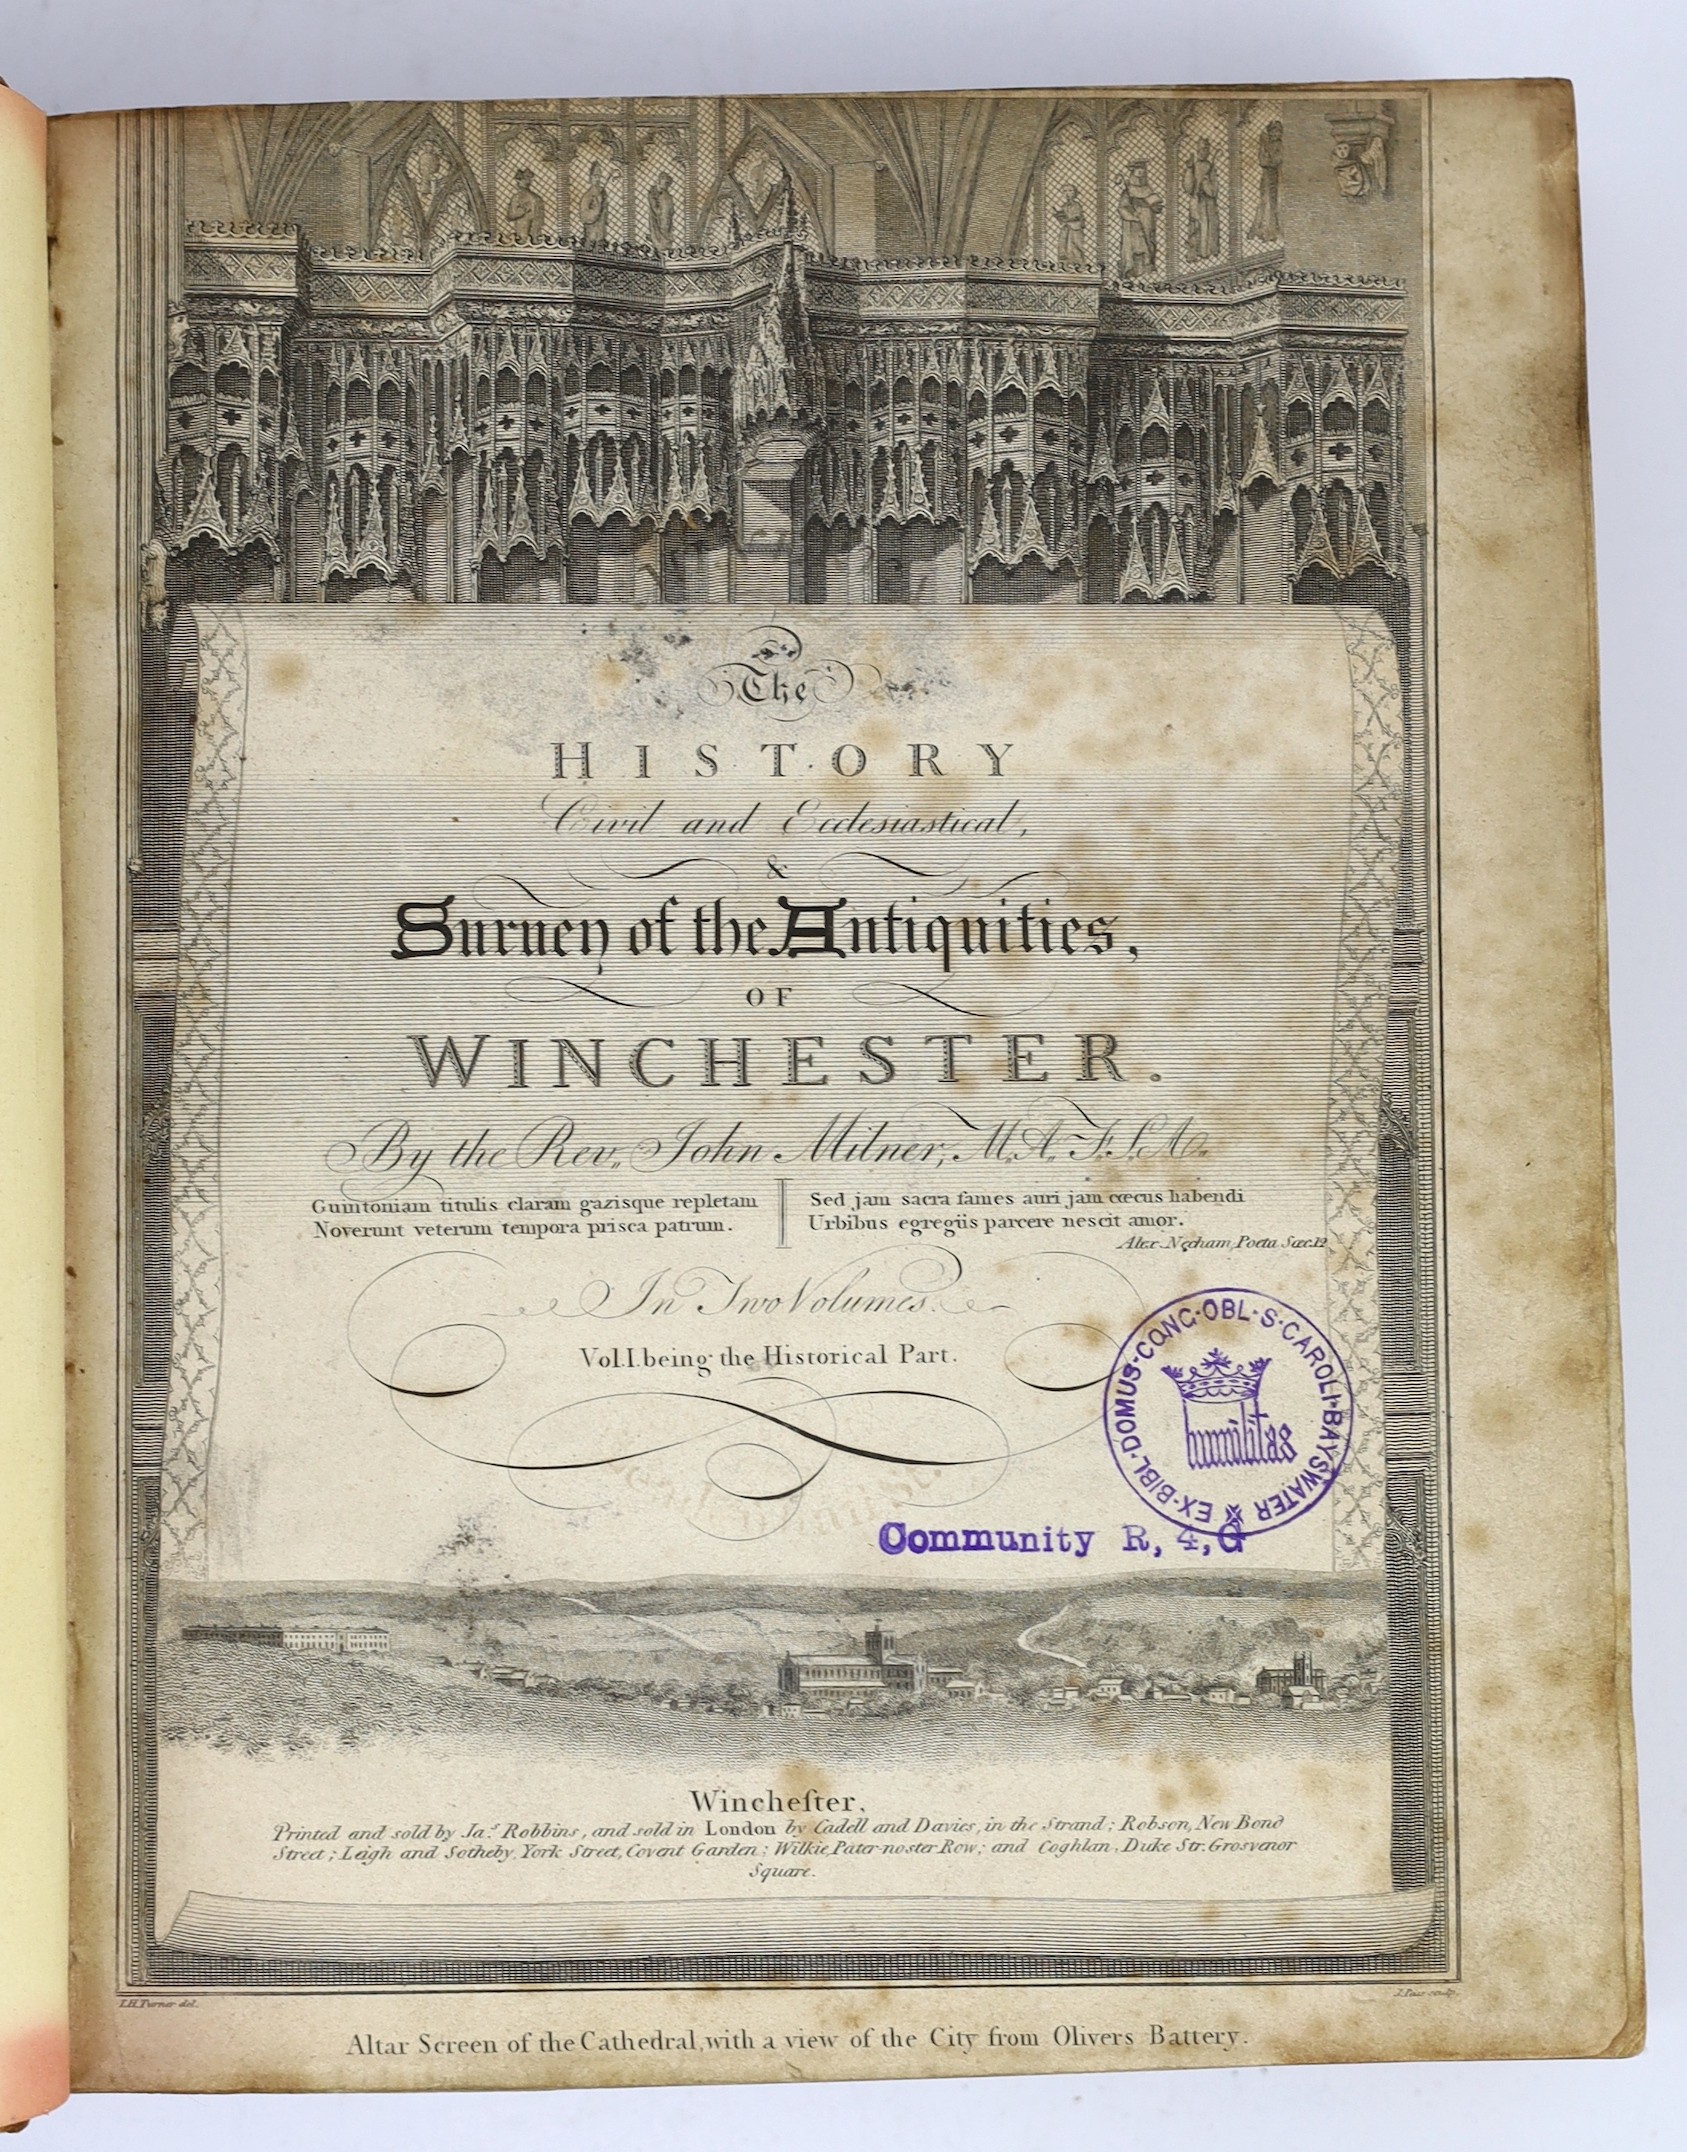 HAMPSHIRE: Milner, Rev. John - The History Civil and Ecclesiastical, & Survey of the Antiquities of Winchester ... 2 vols (in one). pictorial engraved 10 plates (some folded, incl. the City Plan)